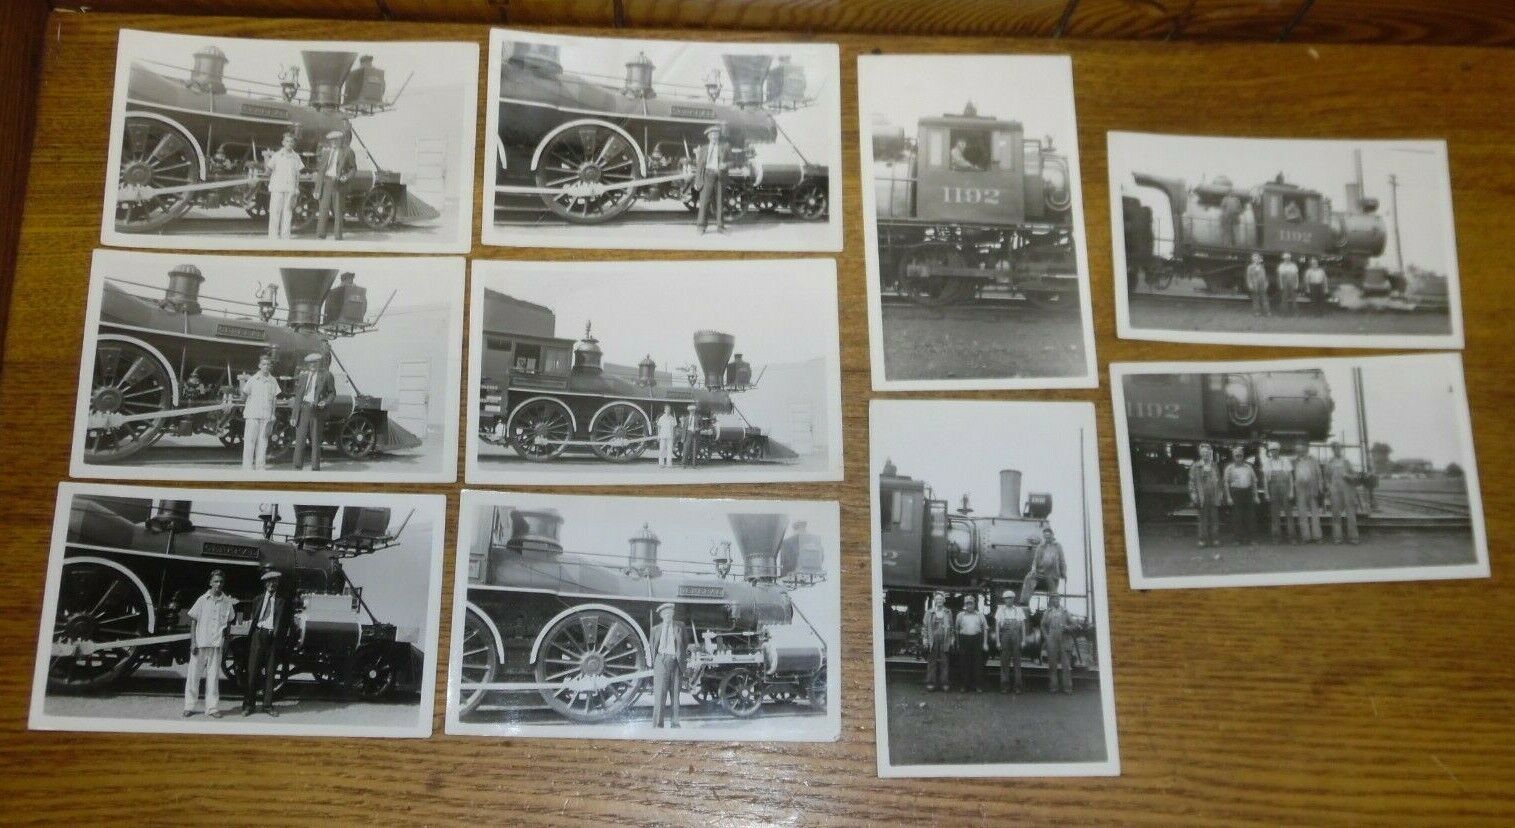 10 1939 NY Worlds Fair Photographs - People Next To The General Train Locomotive